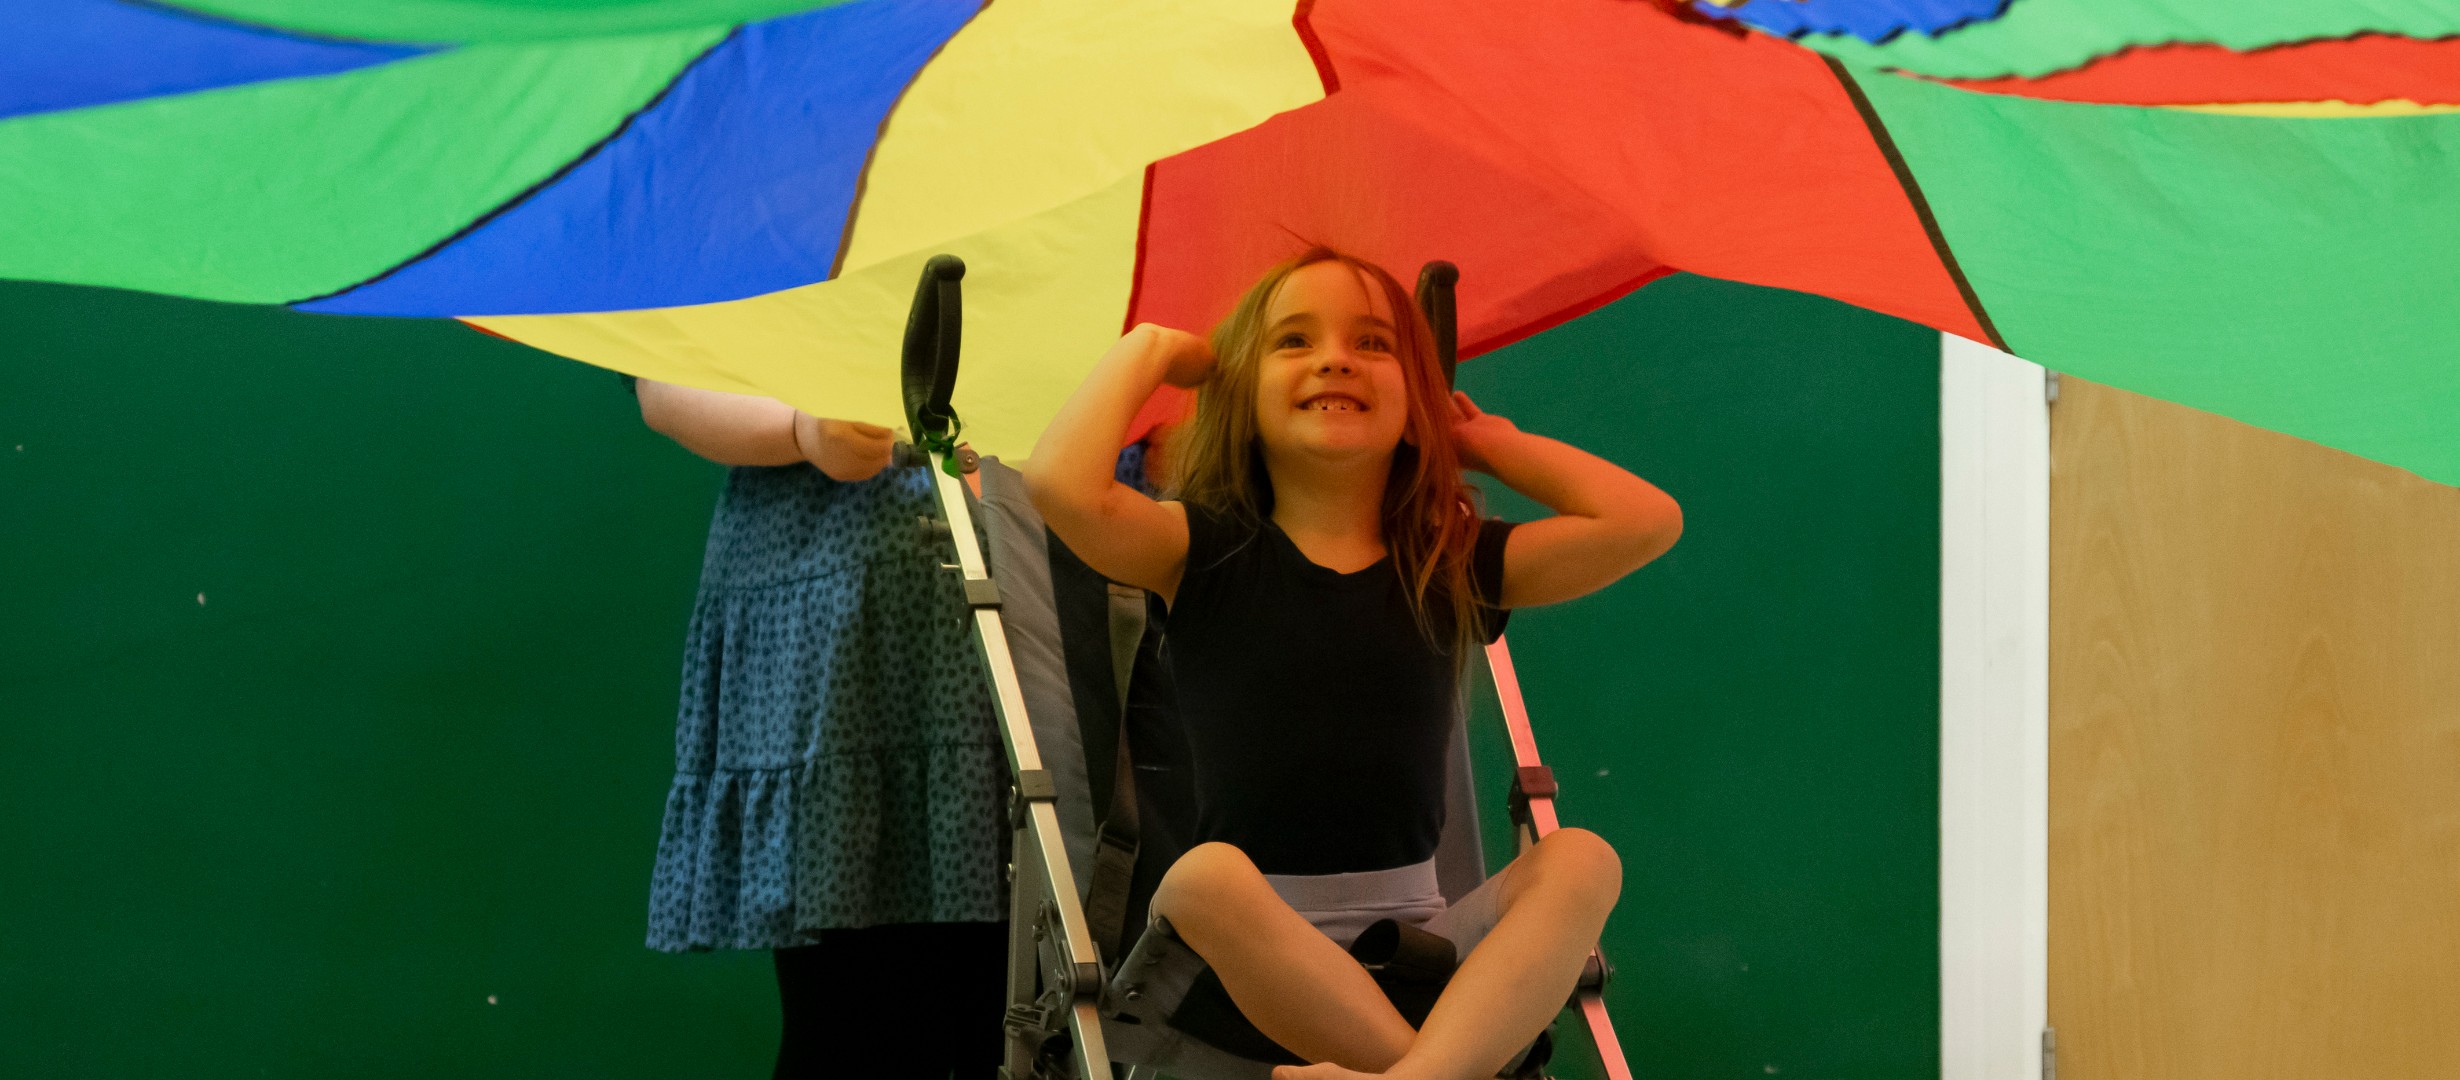 Female dancer sitting in her buggy underneath the parachute, reaching behind her head and smiling